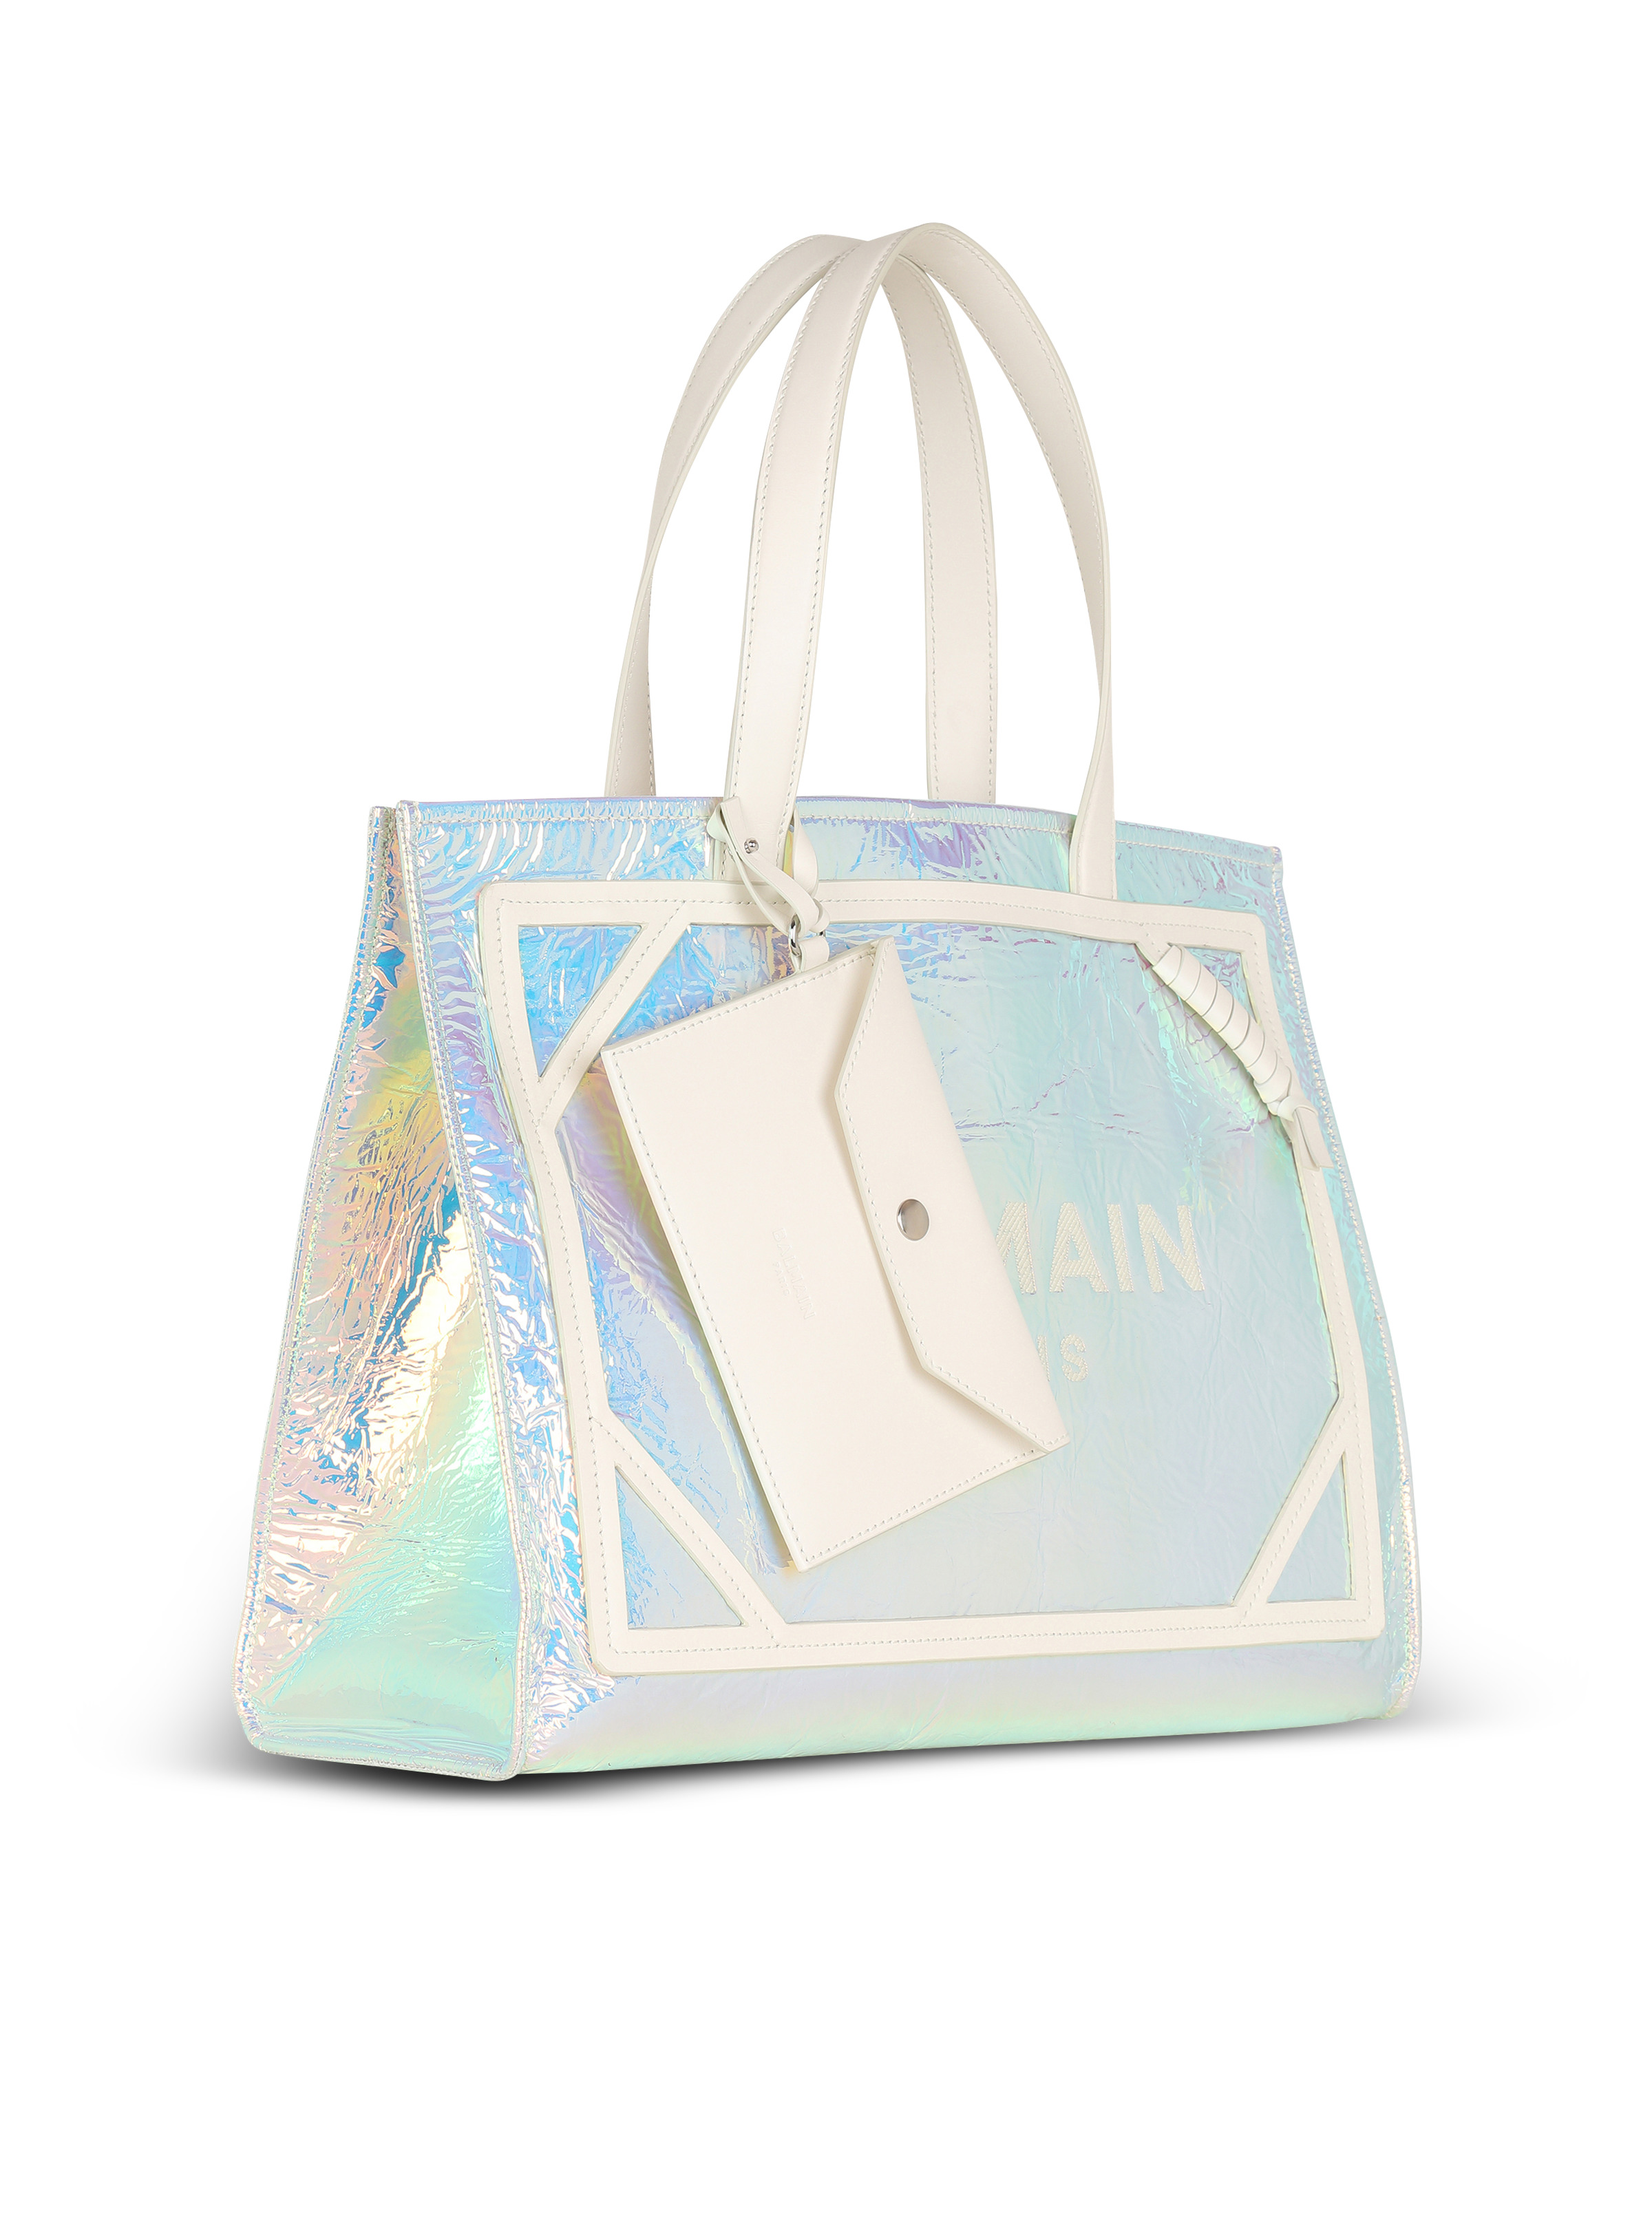 B-Army iridescent leather shopping bag - 3